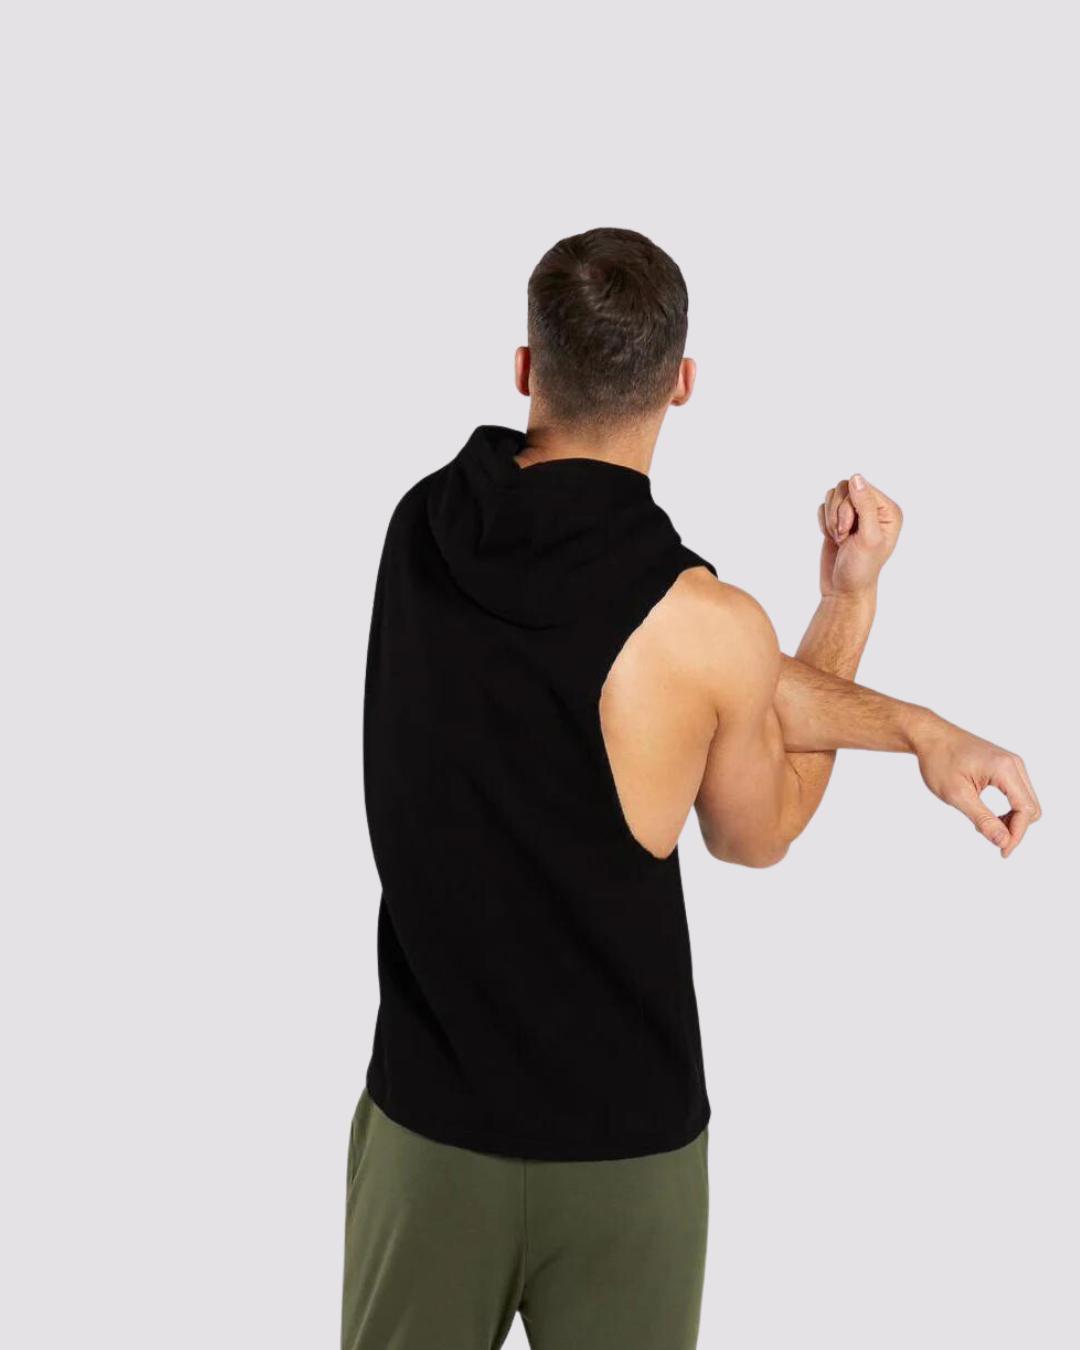 Sleeveless Hoodie - The Entire Gym